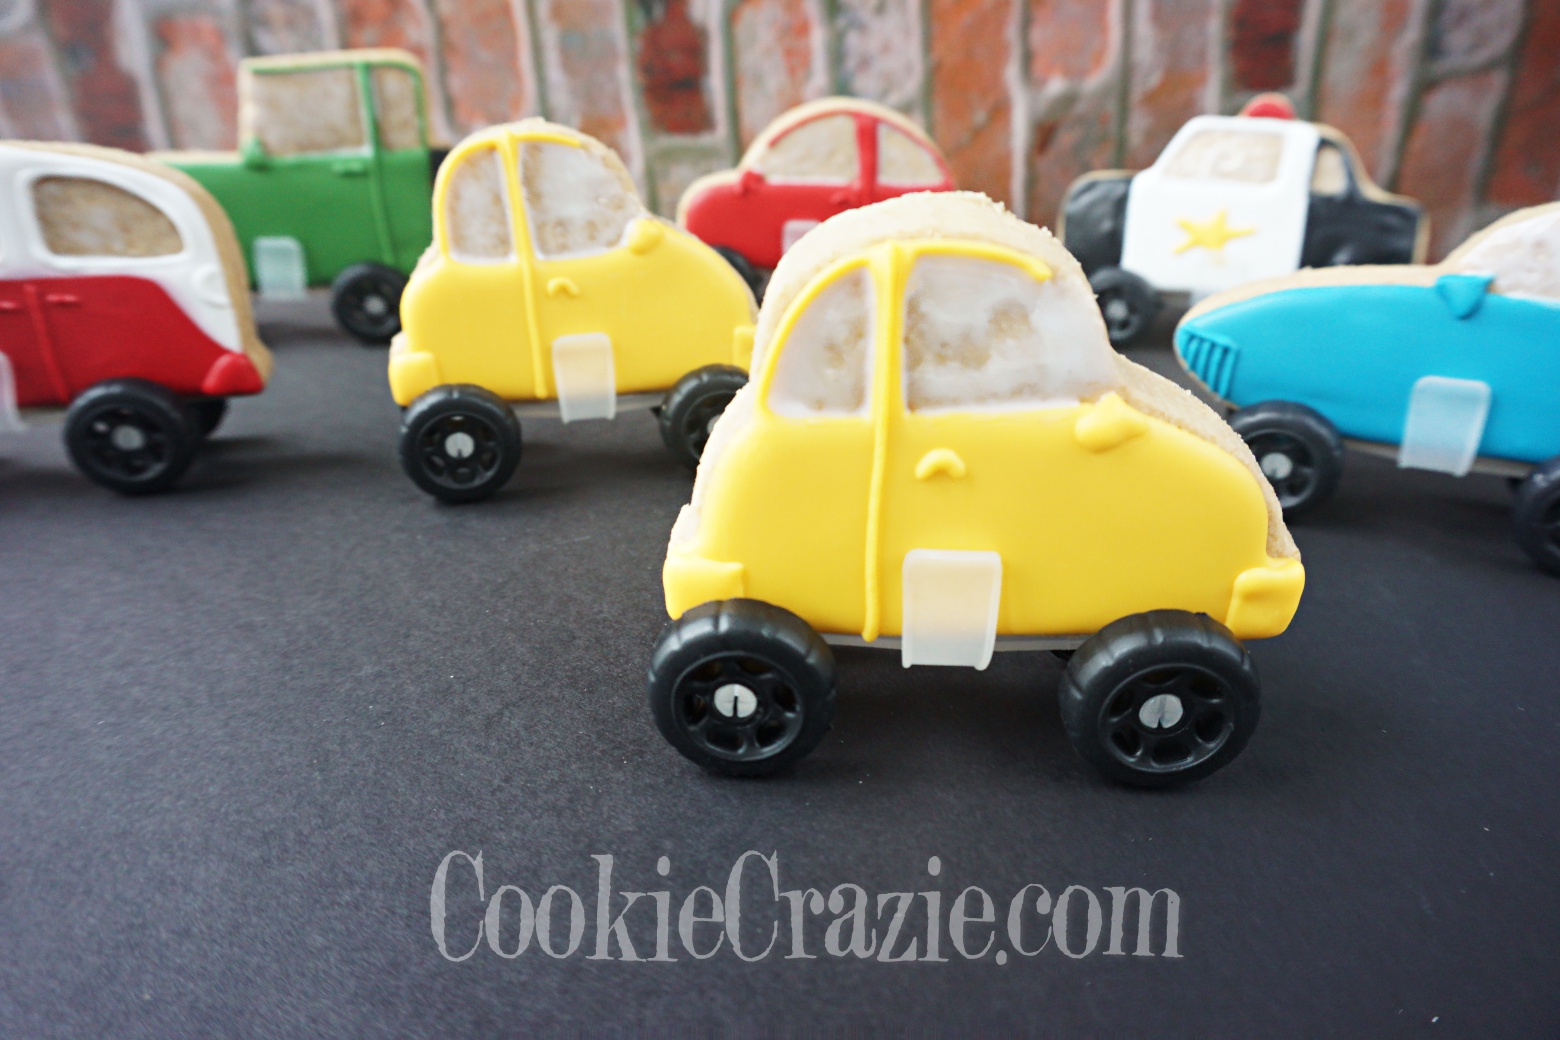  VW Bug Car Decorated Sugar Cookie YouTube video  HERE  